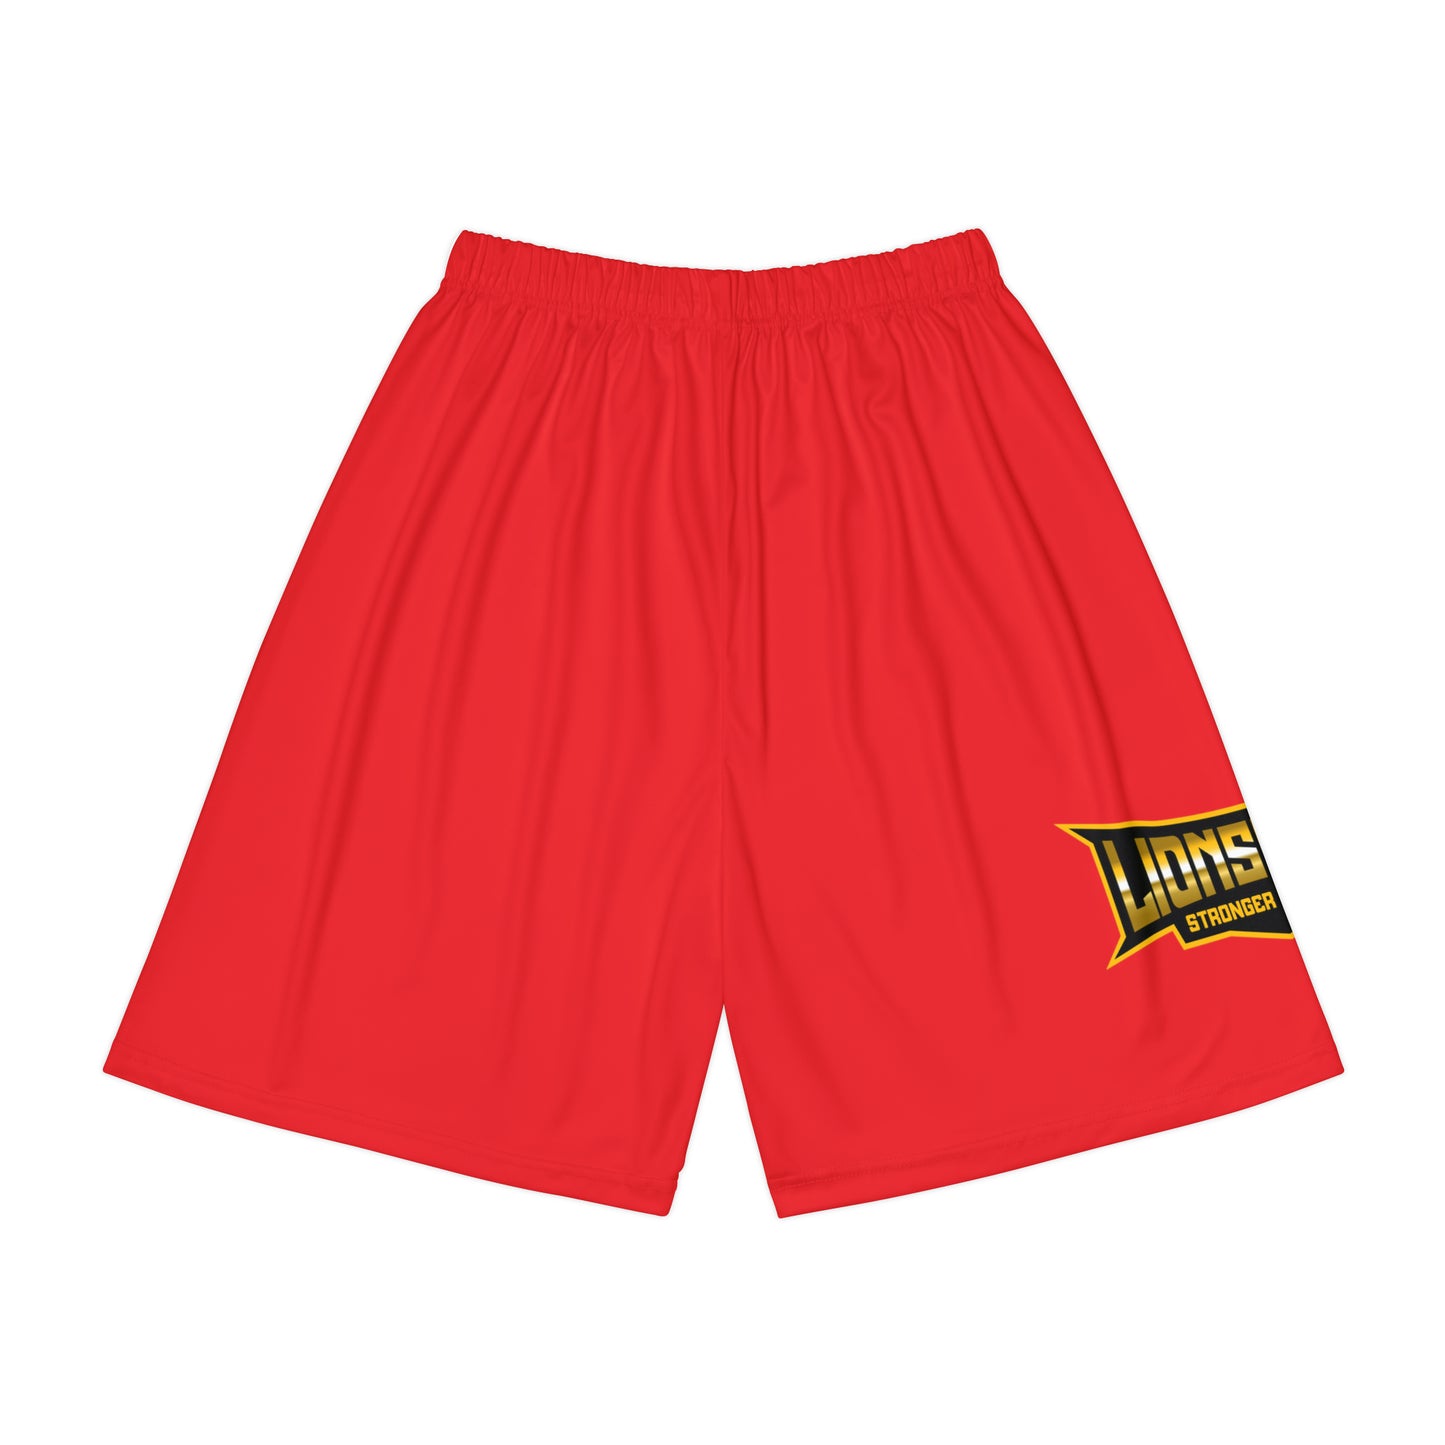 Red Men’s Sports Shorts